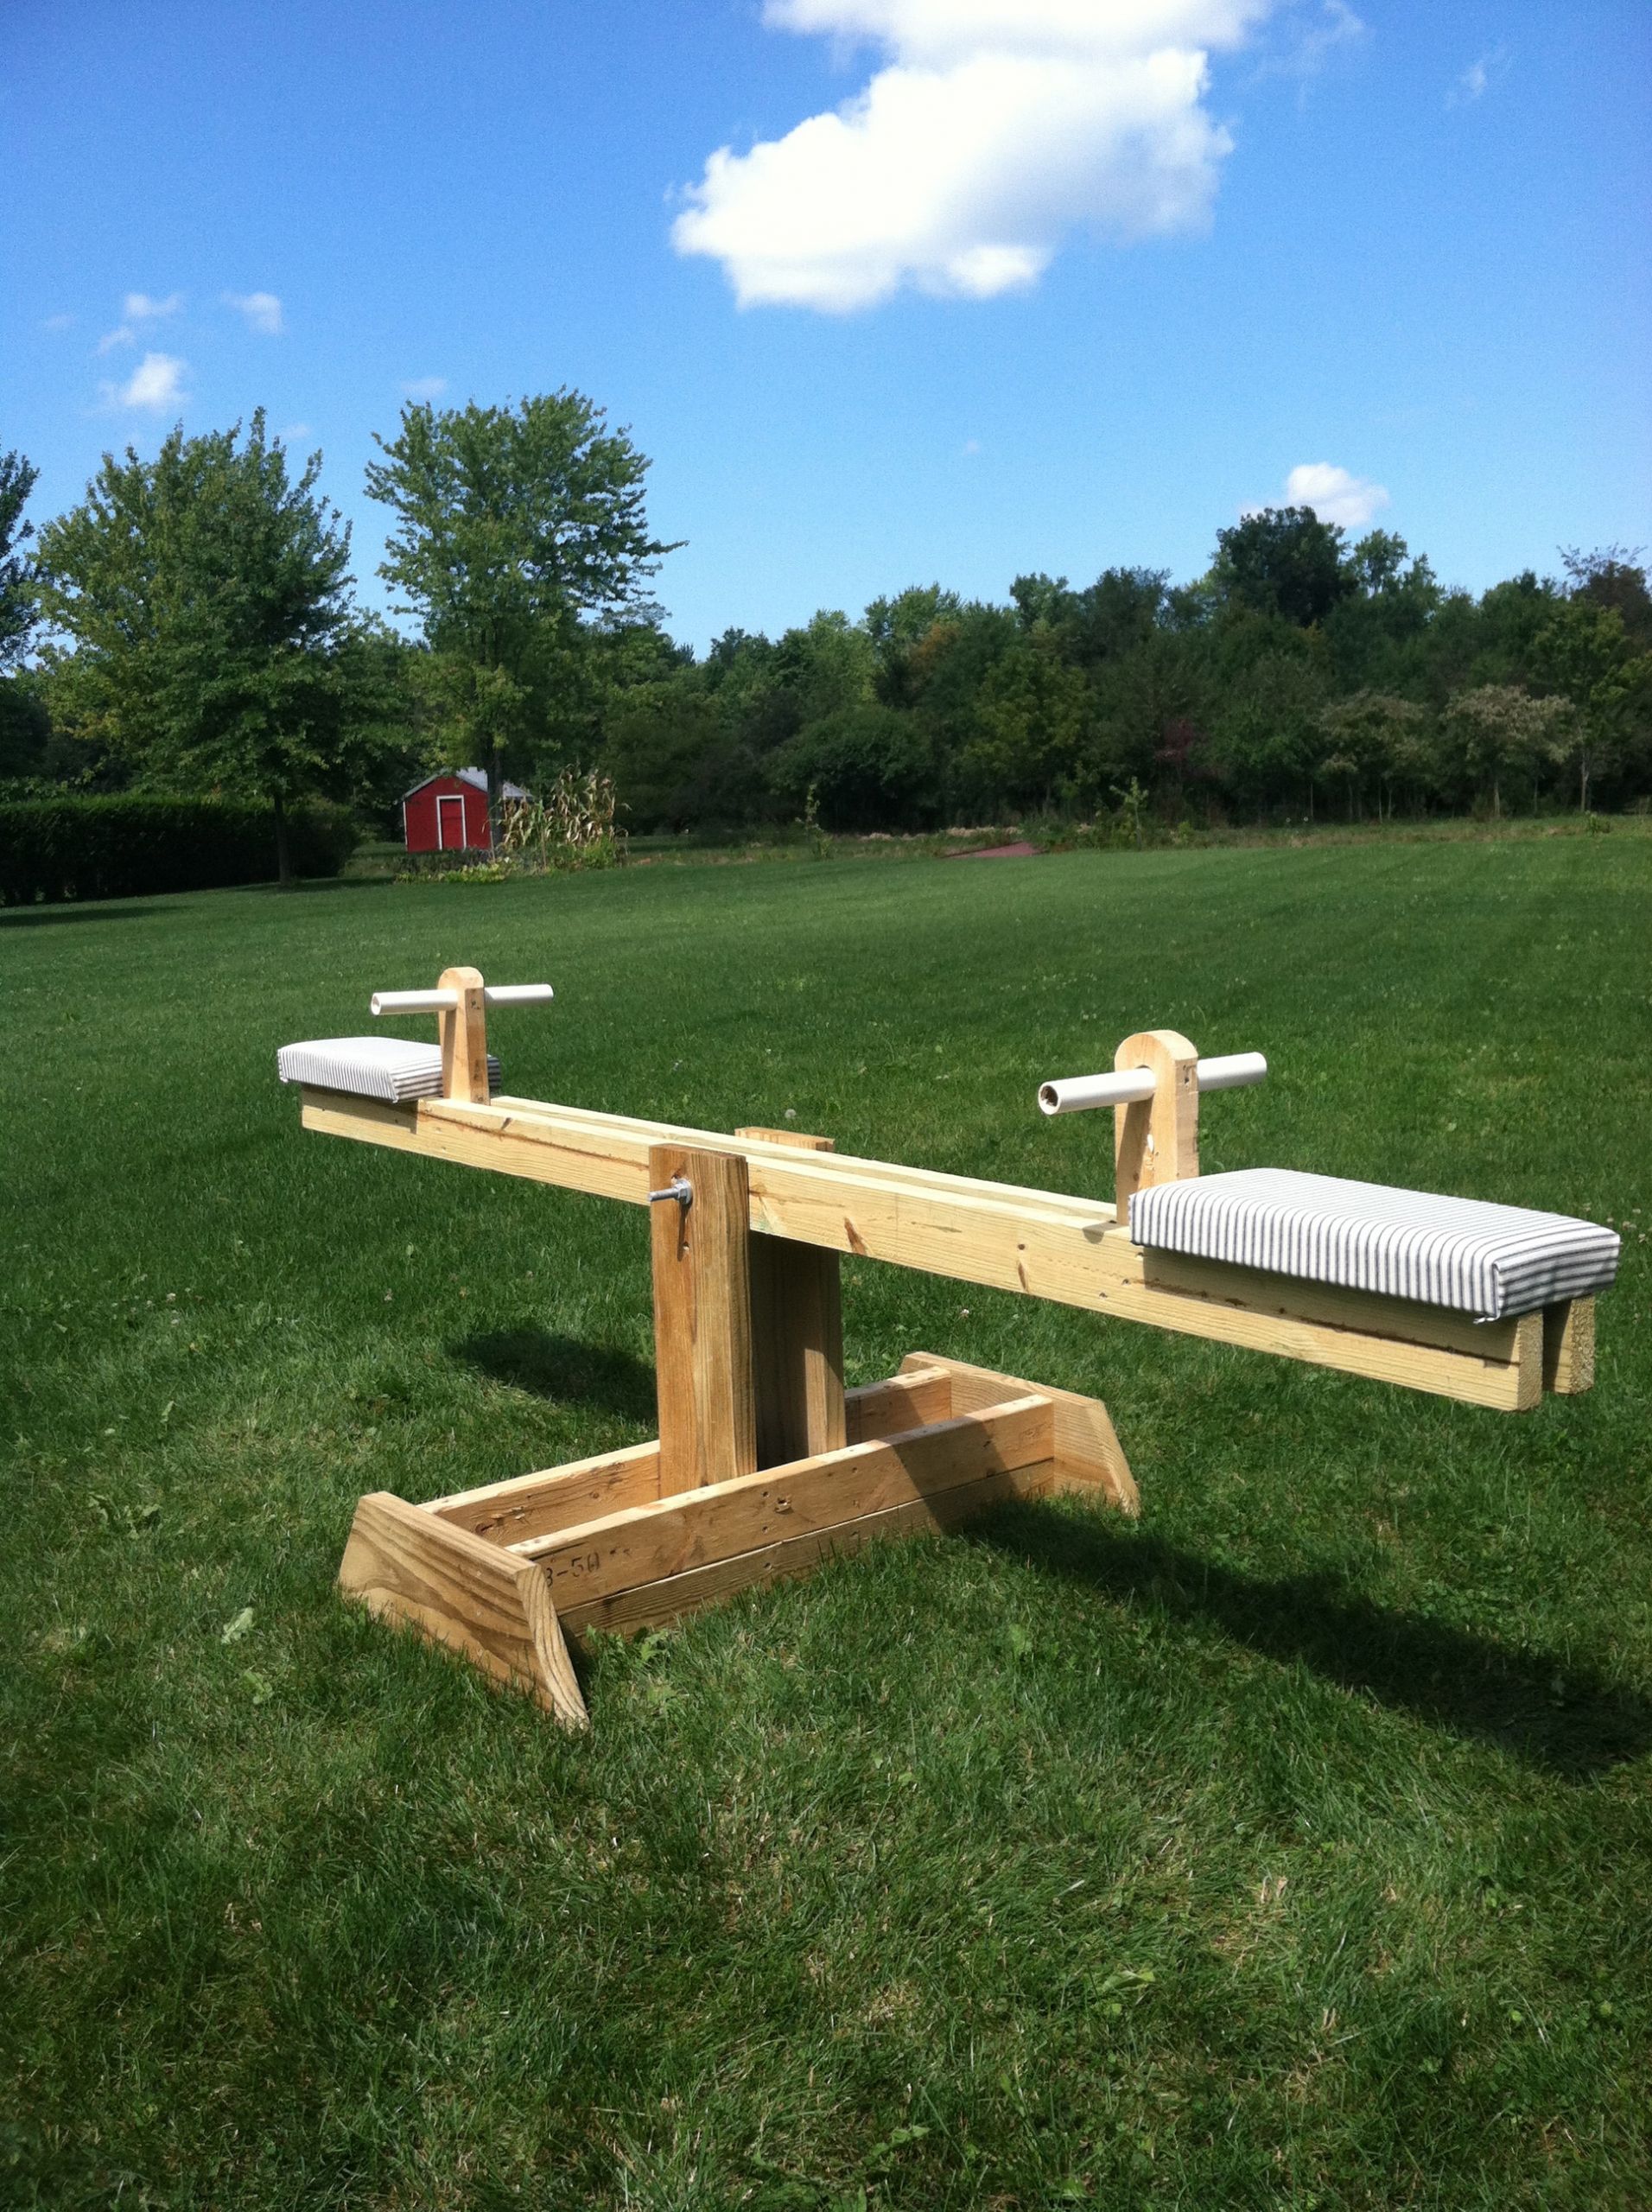 DIY Wood Projects For Kids
 DIY Ana White Teeter Totter Seesaw From Scrap Wood